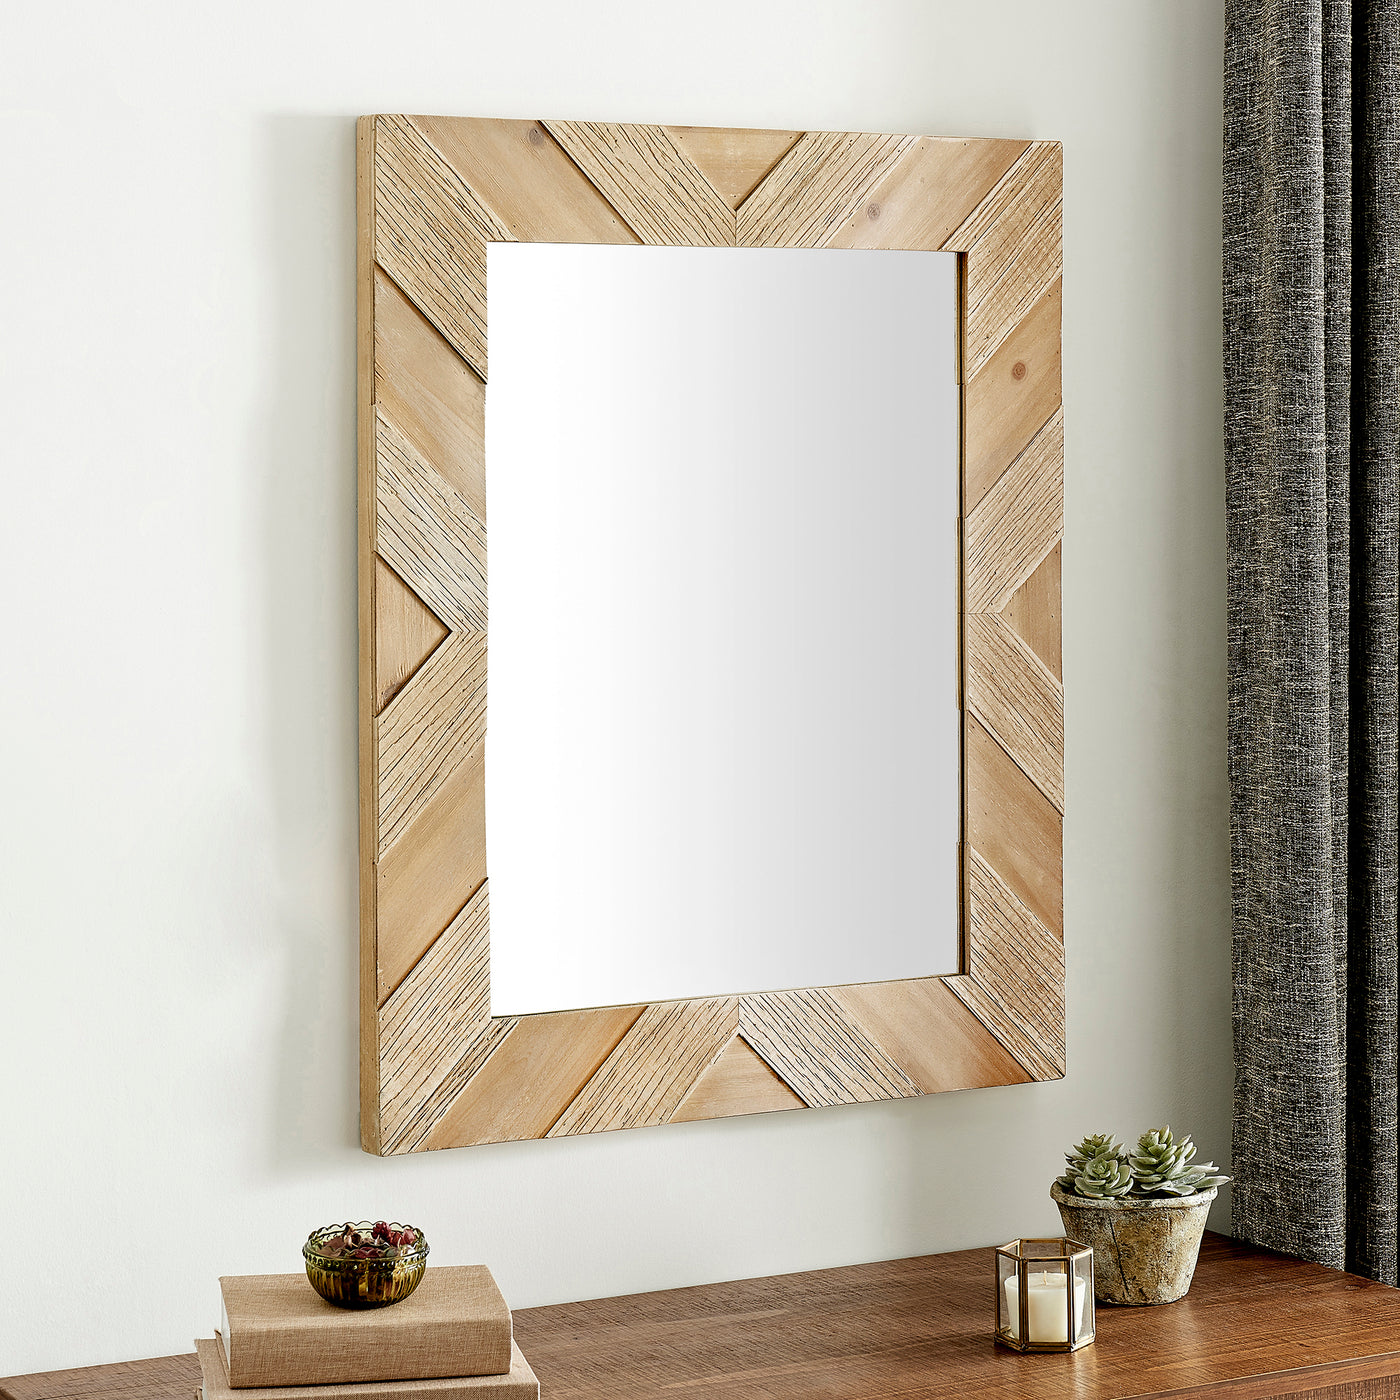 FirsTime & Co. Natural Caldwell Shiplap Wall Mirror, Farmhouse Style, Made of Wood